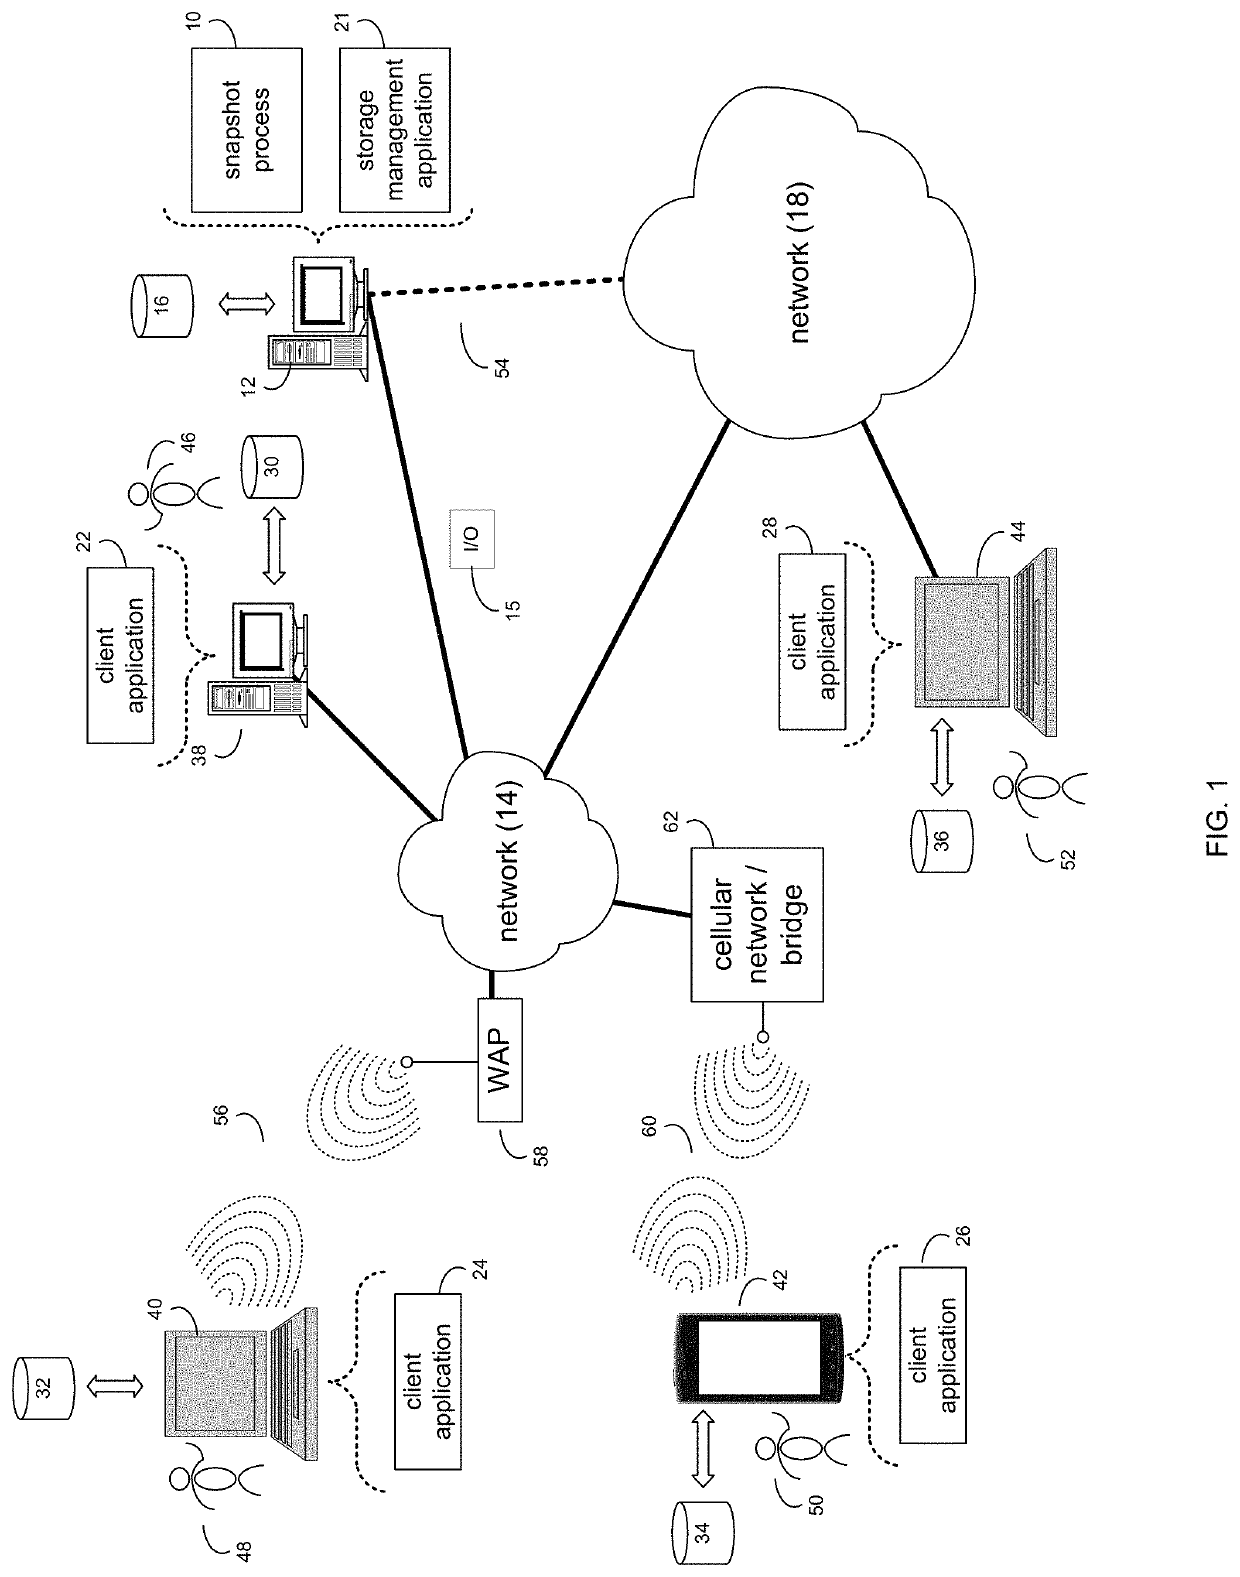 System and method for lazy snapshots for storage cluster with delta log based architecture